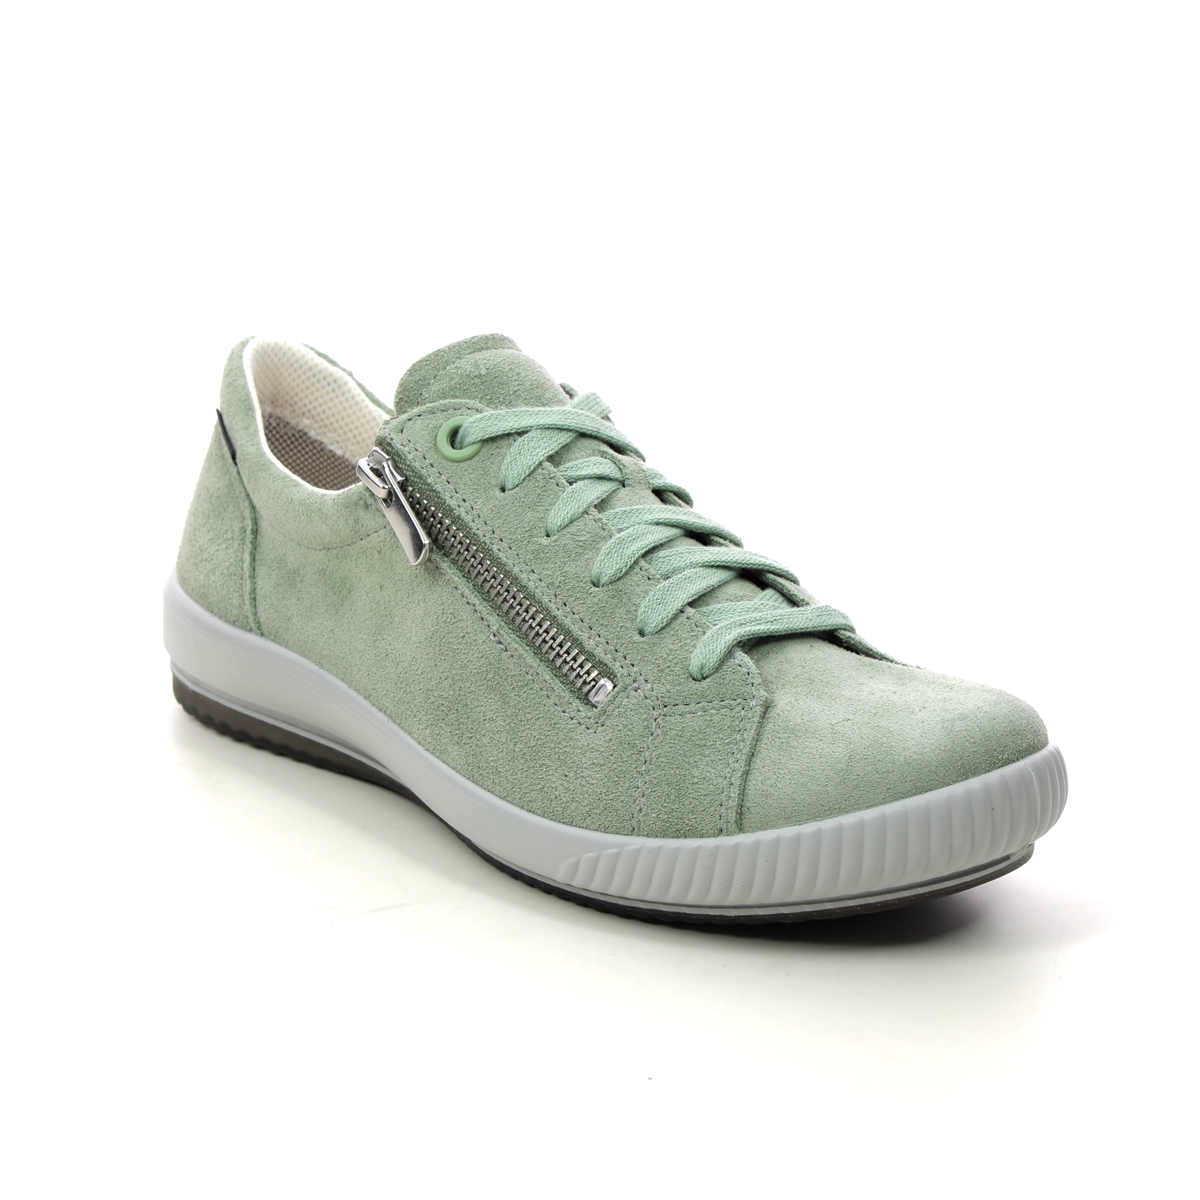 Legero Tanaro 5 Gtx Mint Suede Womens Lacing Shoes 2000219-7200 In Size 5.5 In Plain Mint Suede